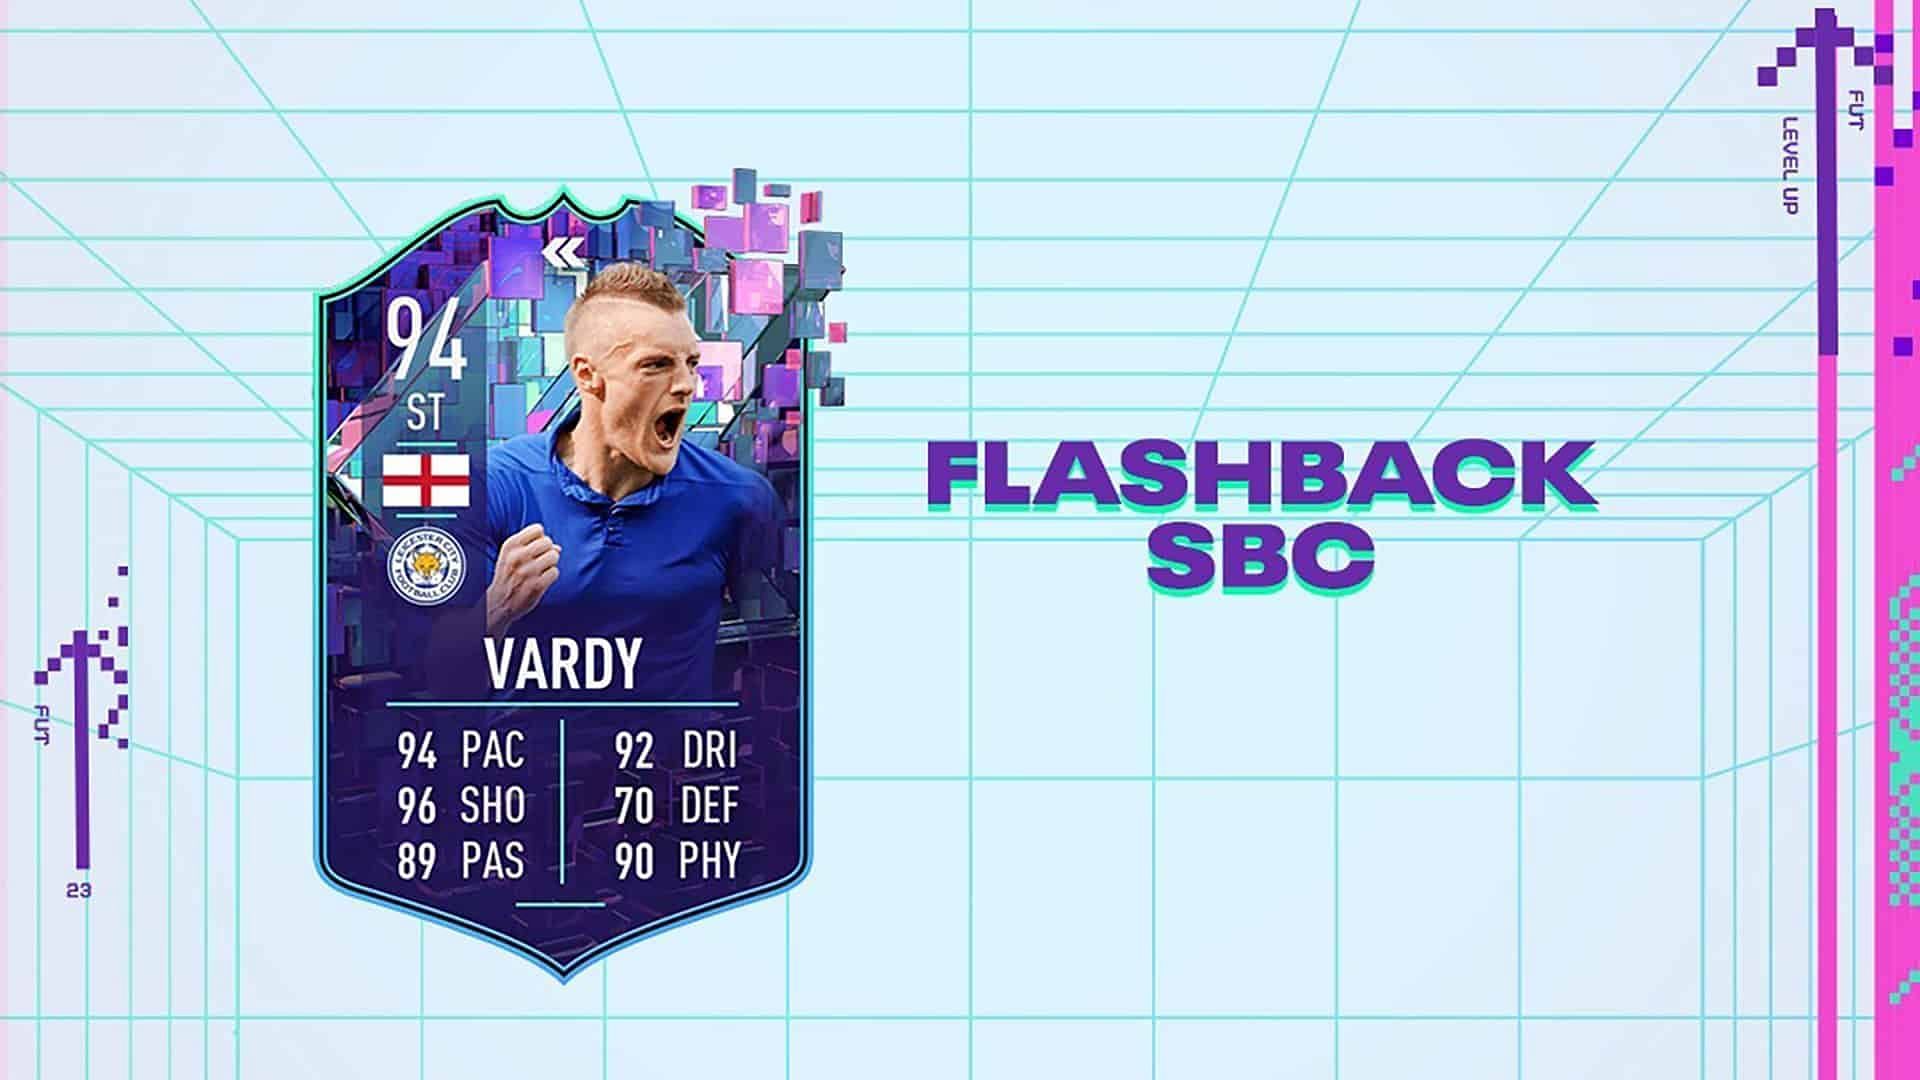 The Jamie Vardy Flashback SBC is now available in FIFA 23 Ultimate Team (Image via EA Sports)